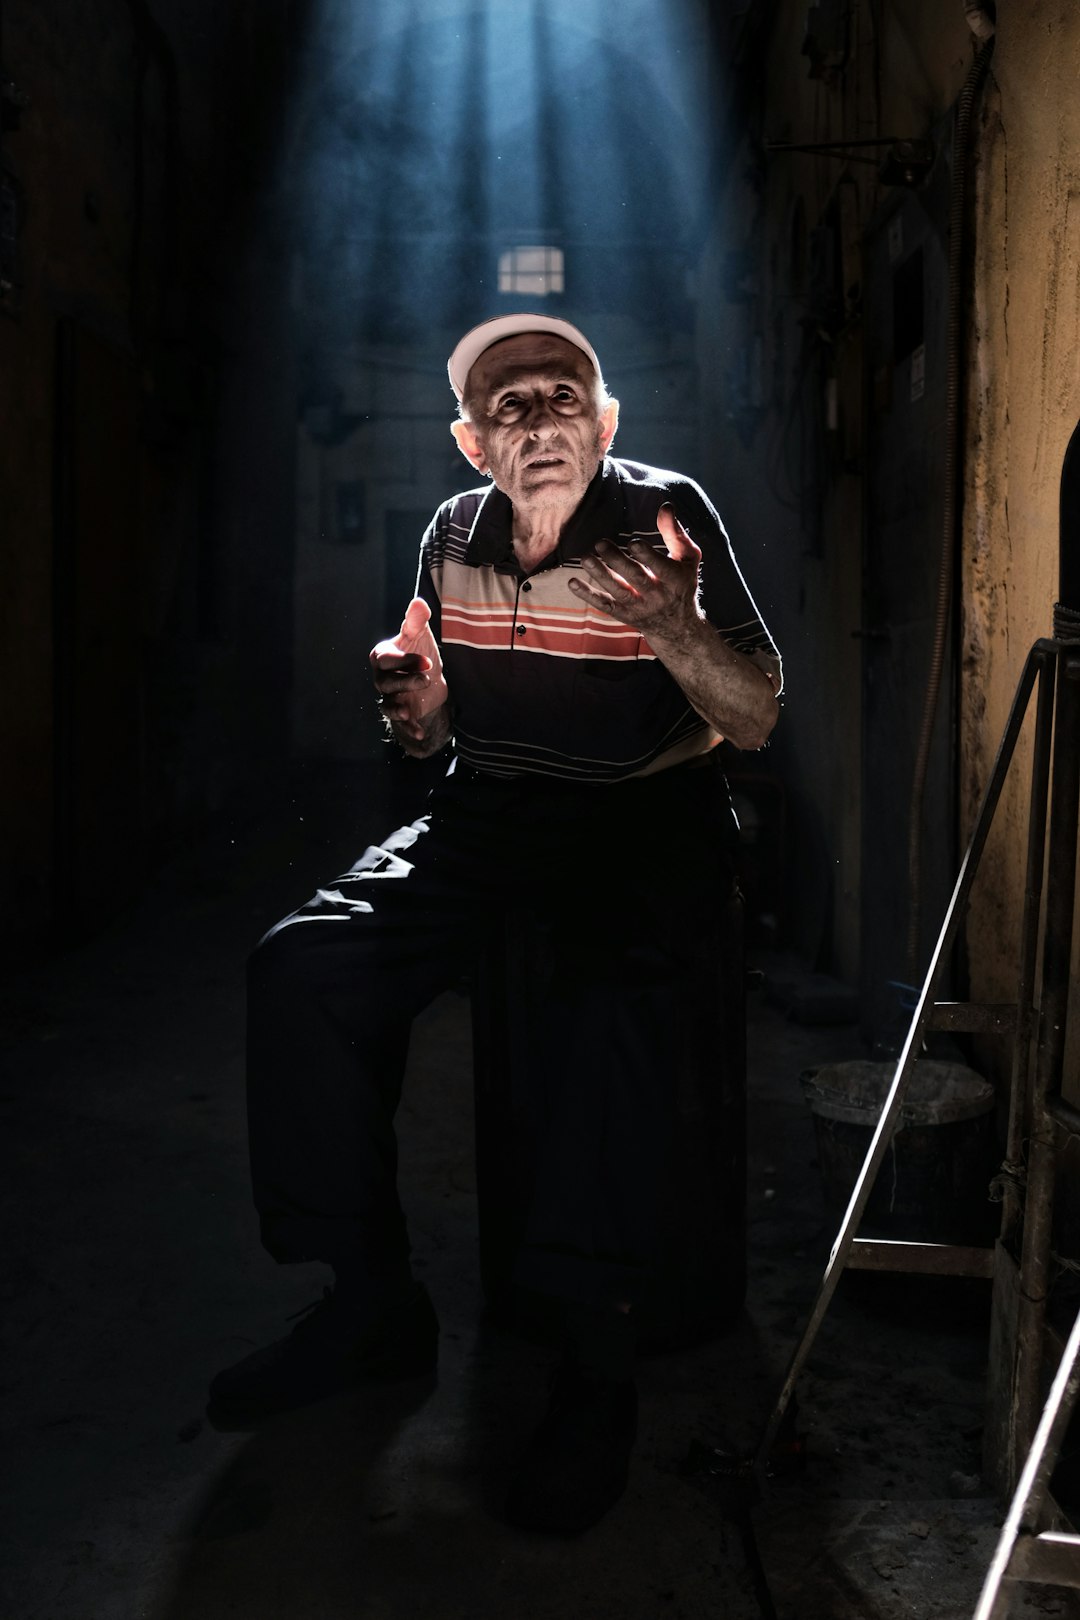 man wearing black and beige striped polo shirt and black pants sitting on stool with lights